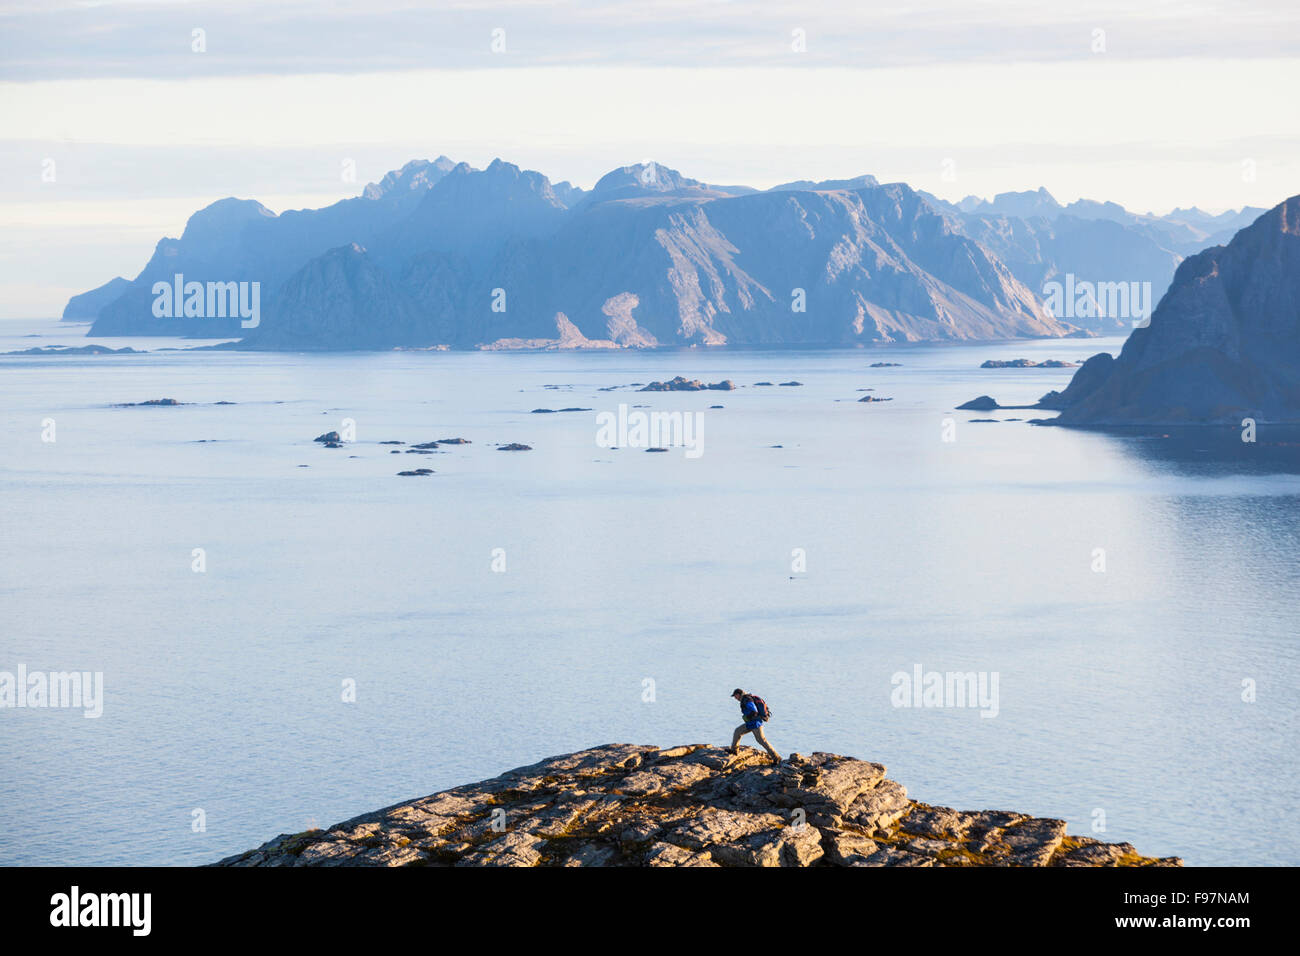 A hiker on Vaeroy Island, Lofoten Islands, Norway, with Mosken (right) and Moskenesoya Islands in the distance. Stock Photo